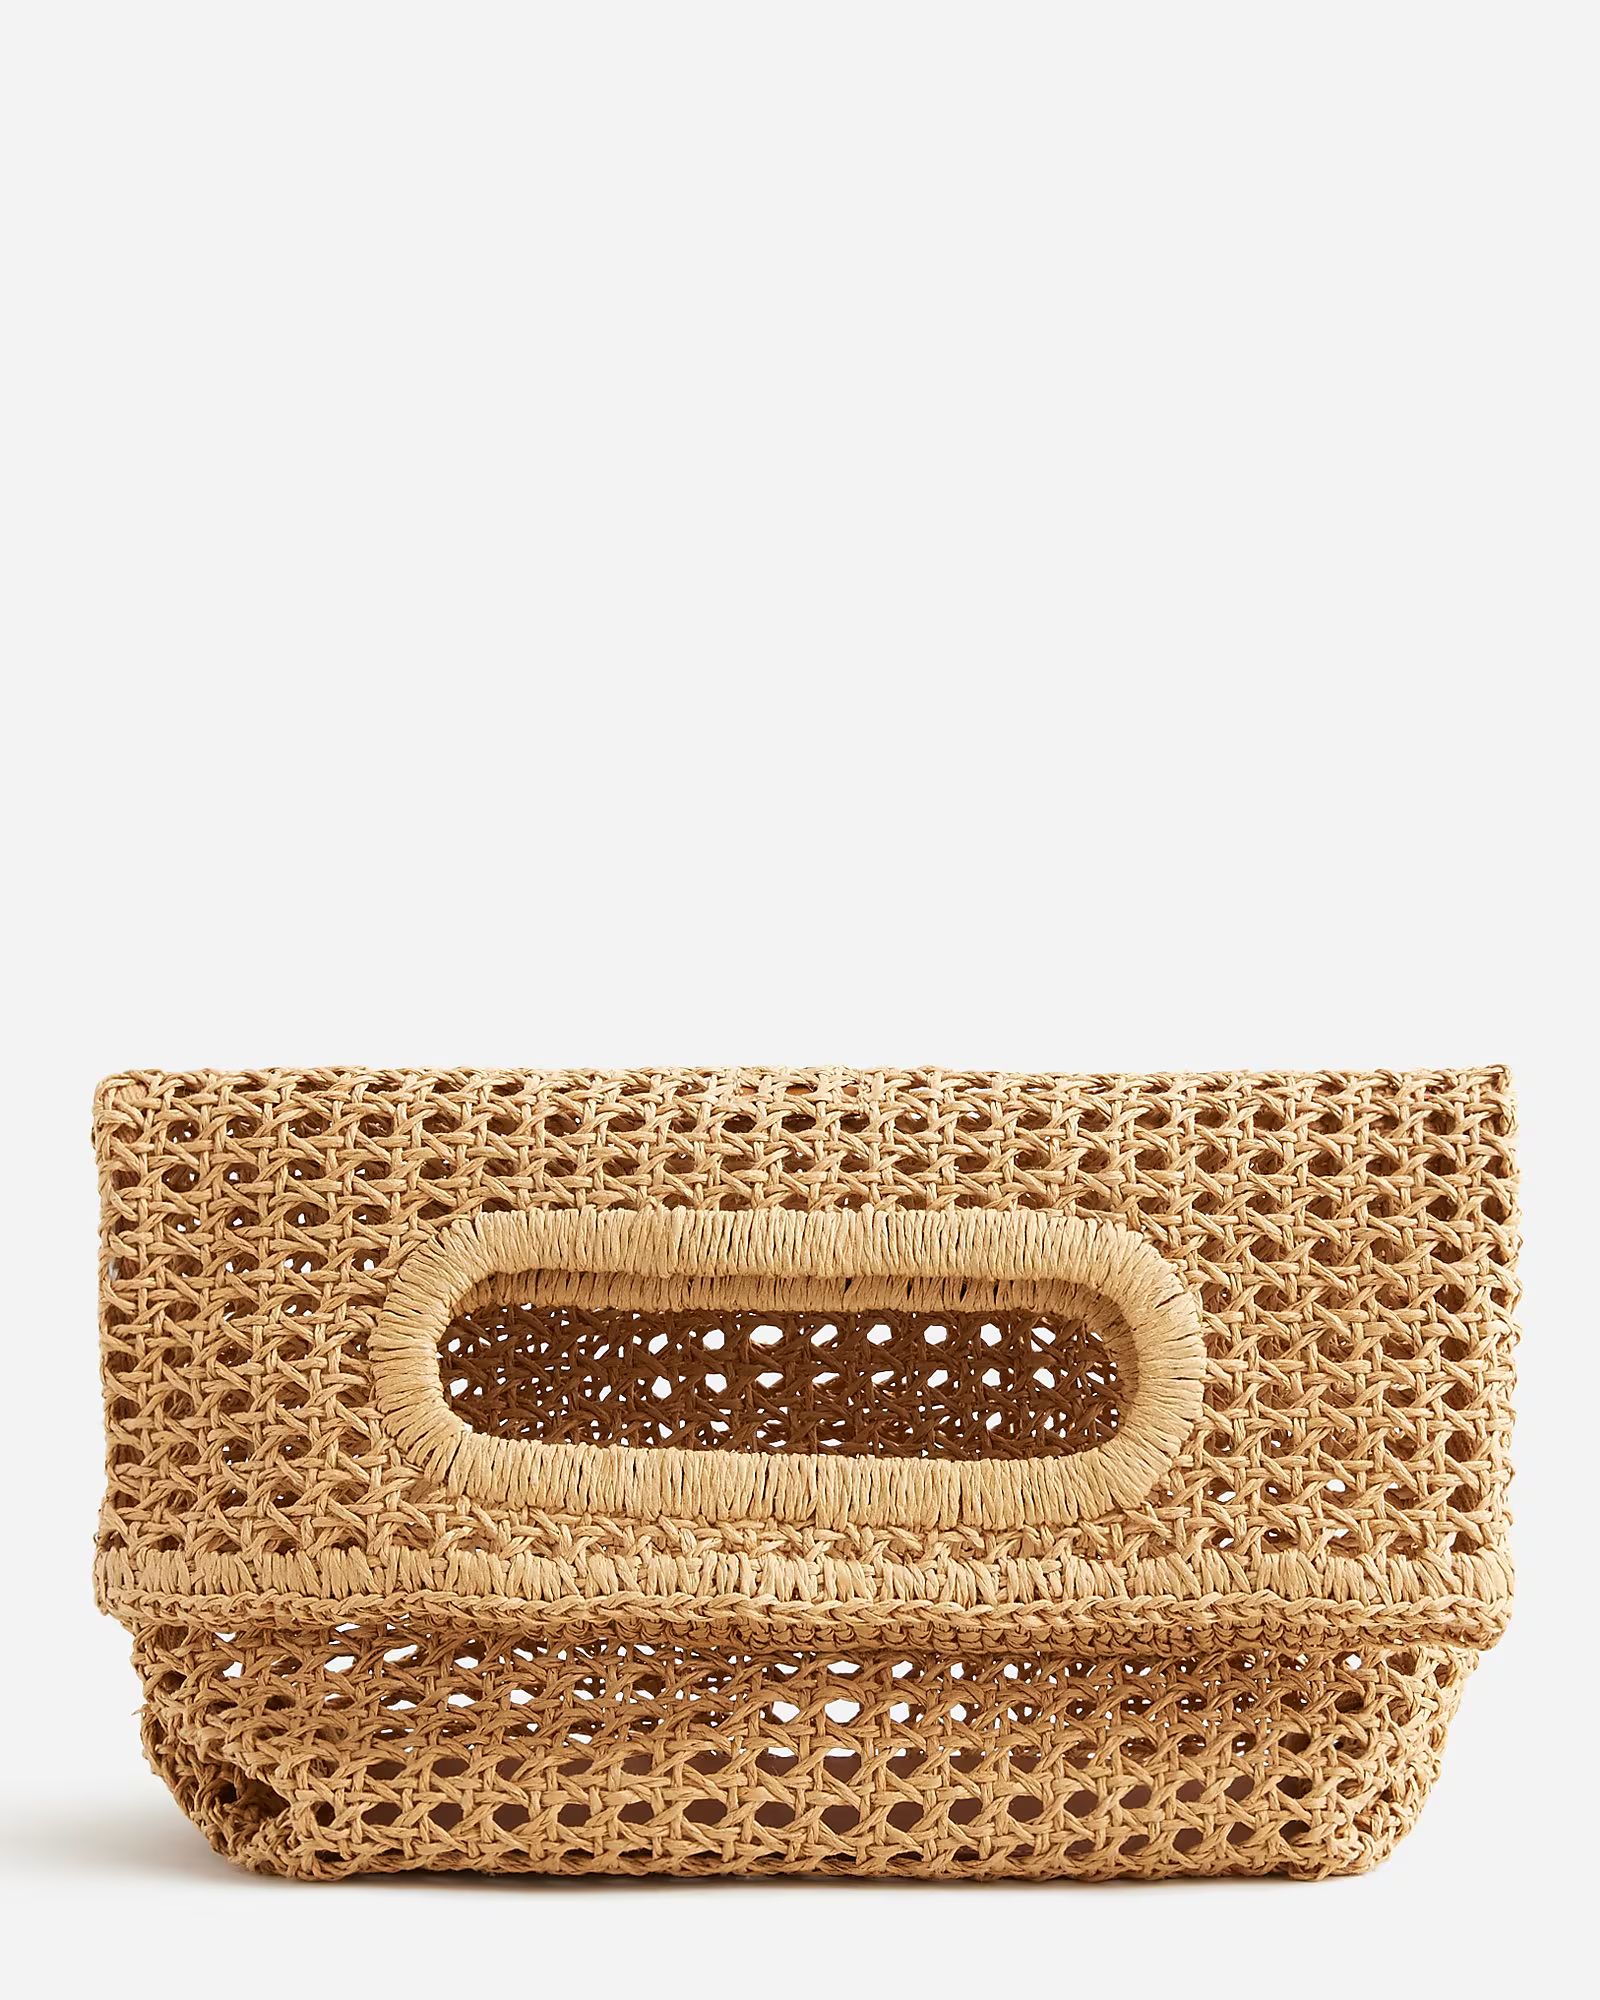 top rated4.3(3 REVIEWS)Open-weave foldover clutch$89.50NaturalOne SizePre-OrderSize & Fit Informa... | J.Crew US